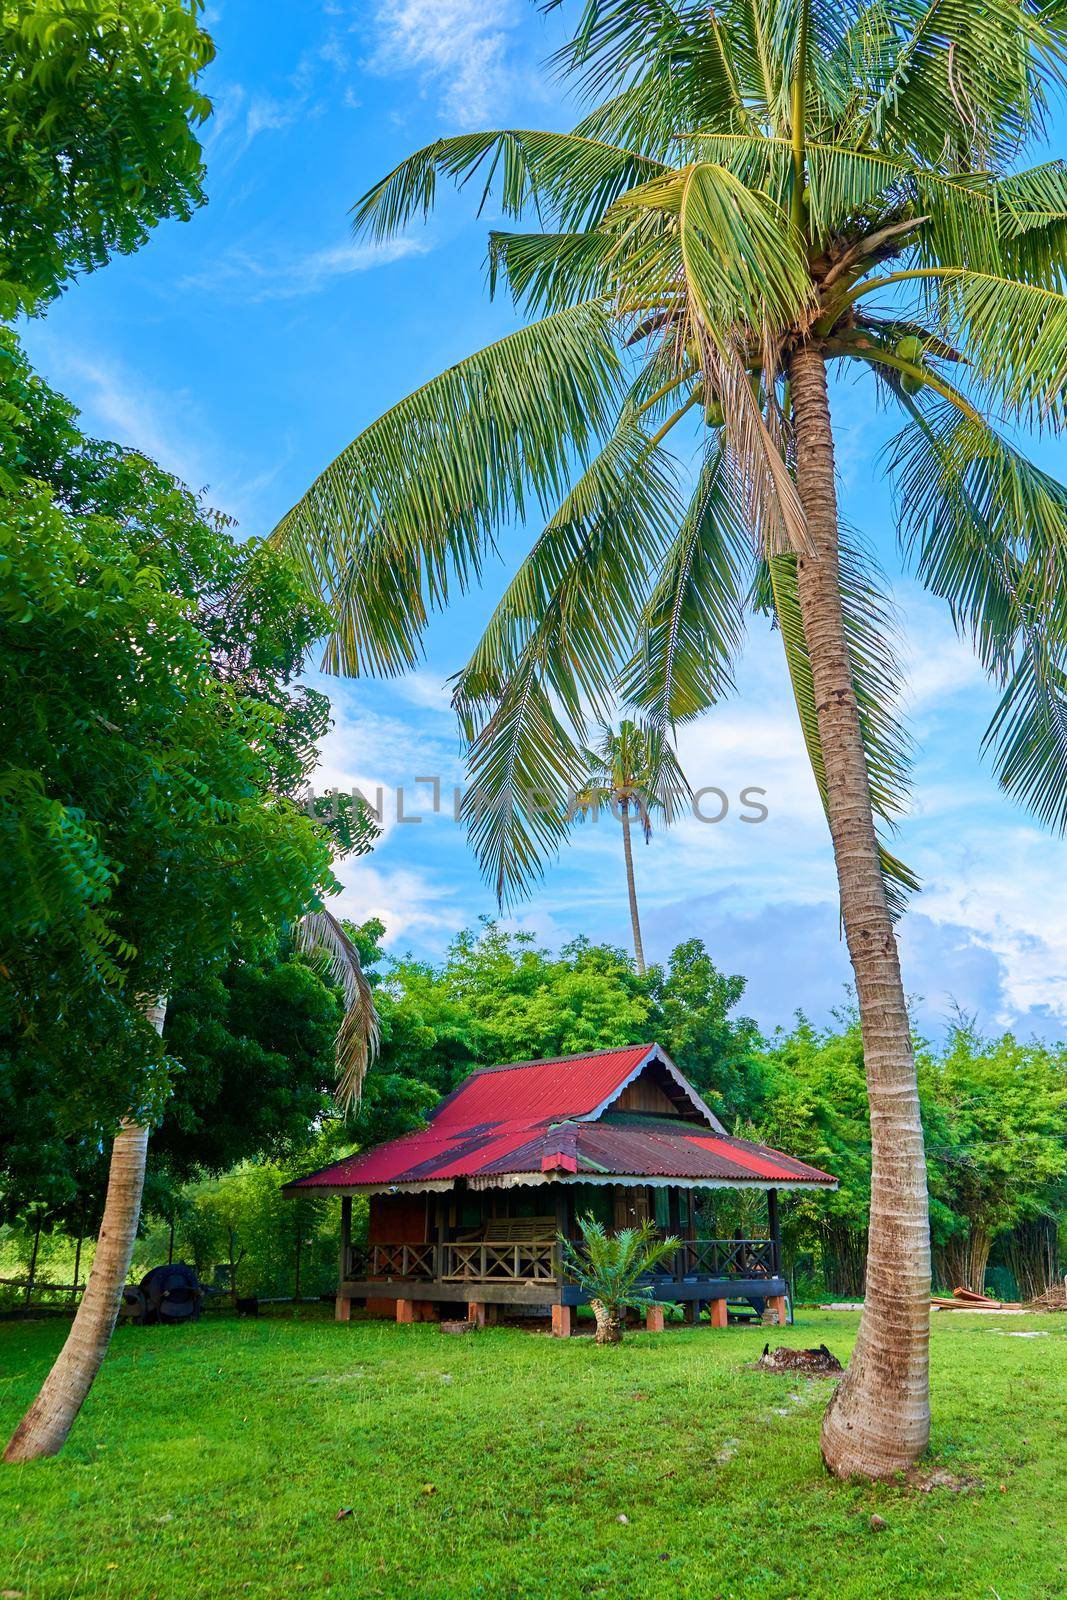 Vacation housing. A house in the jungle on an island